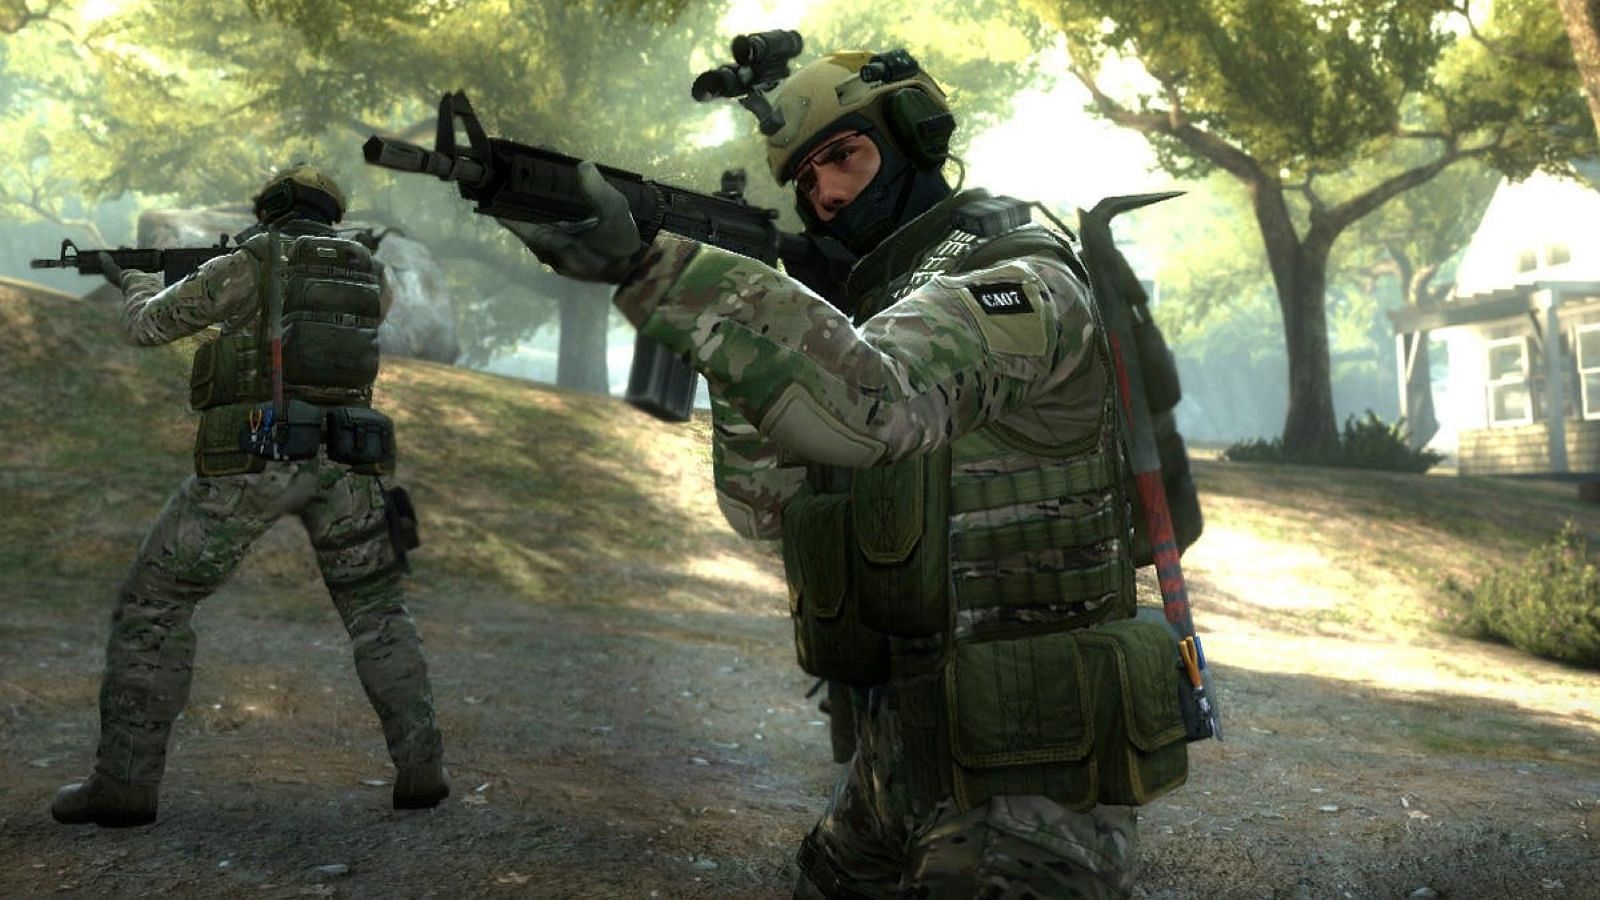 Counter Strike 2 Might Launch For Android and iOS Mobile Devices -  MySmartPrice